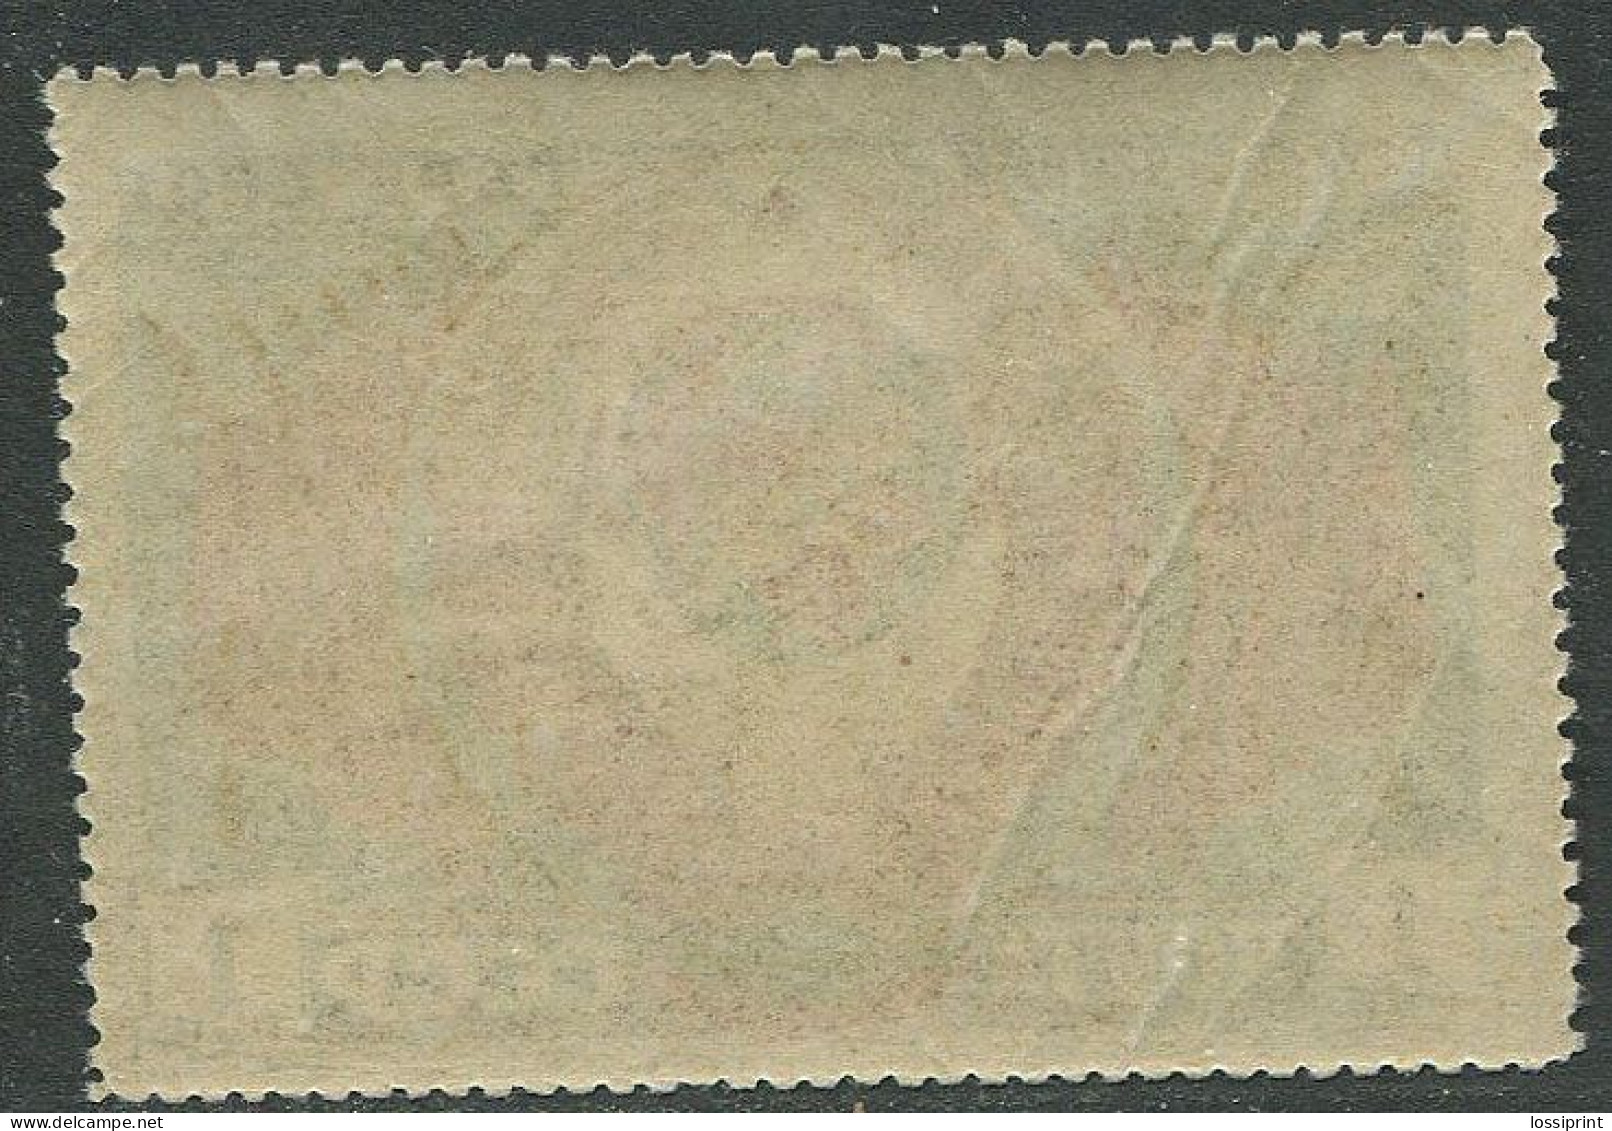 Soviet Union:Russia:USSR Unused Stamp USSR Coat Of Arm, Probably Blue-grey, 1947, MNH - Unused Stamps